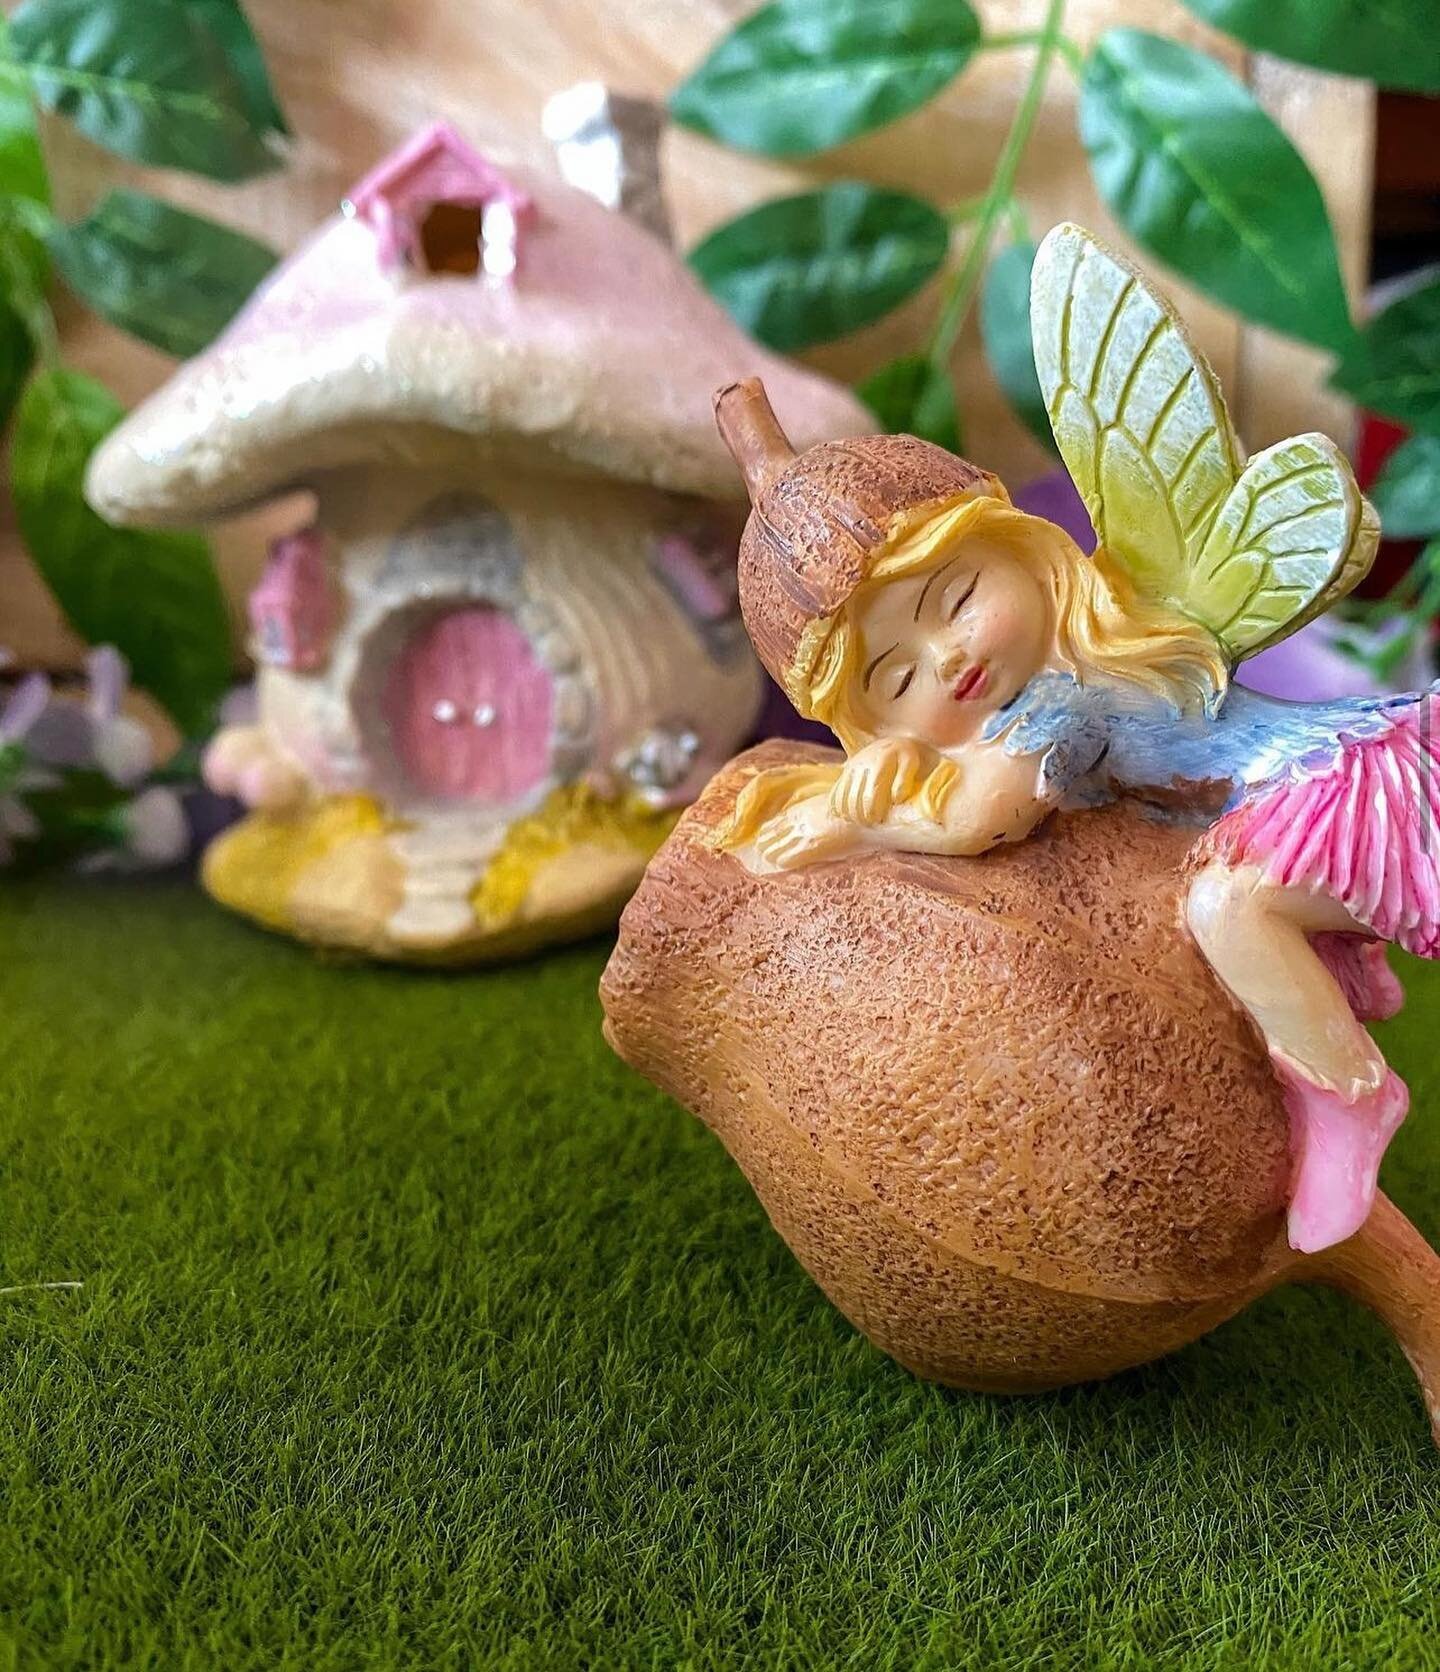 Beautiful Fairy Garden Accessories to add to your collection! The Fairies will love it 🌿✨
&bull;
&bull;
&bull;
&bull;
&bull;
#fairygarden #fairygardenaccessories #fairygardenideas #fairyhouses #fairyslide #fairyfurniture #fairypond #fairyshop #magic